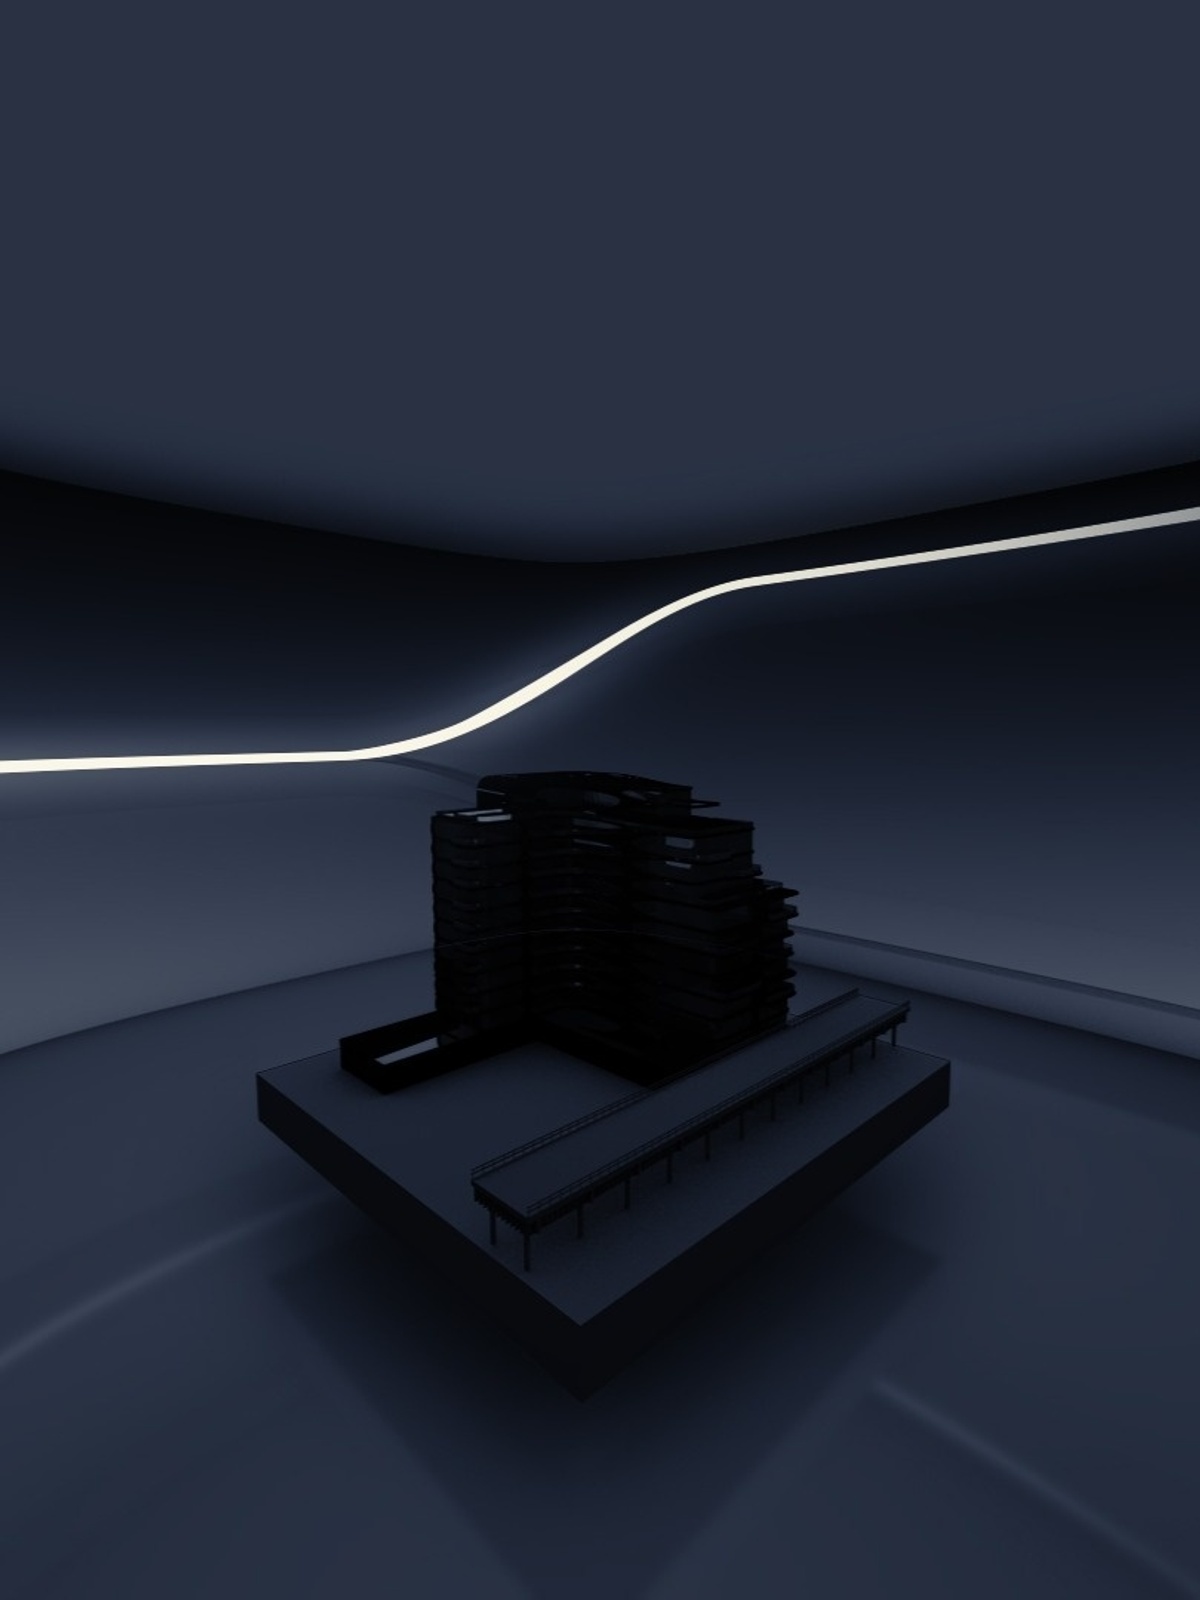 Render of an architectural model in sleek, dimly-lit room with an organic line of lighting on the wall